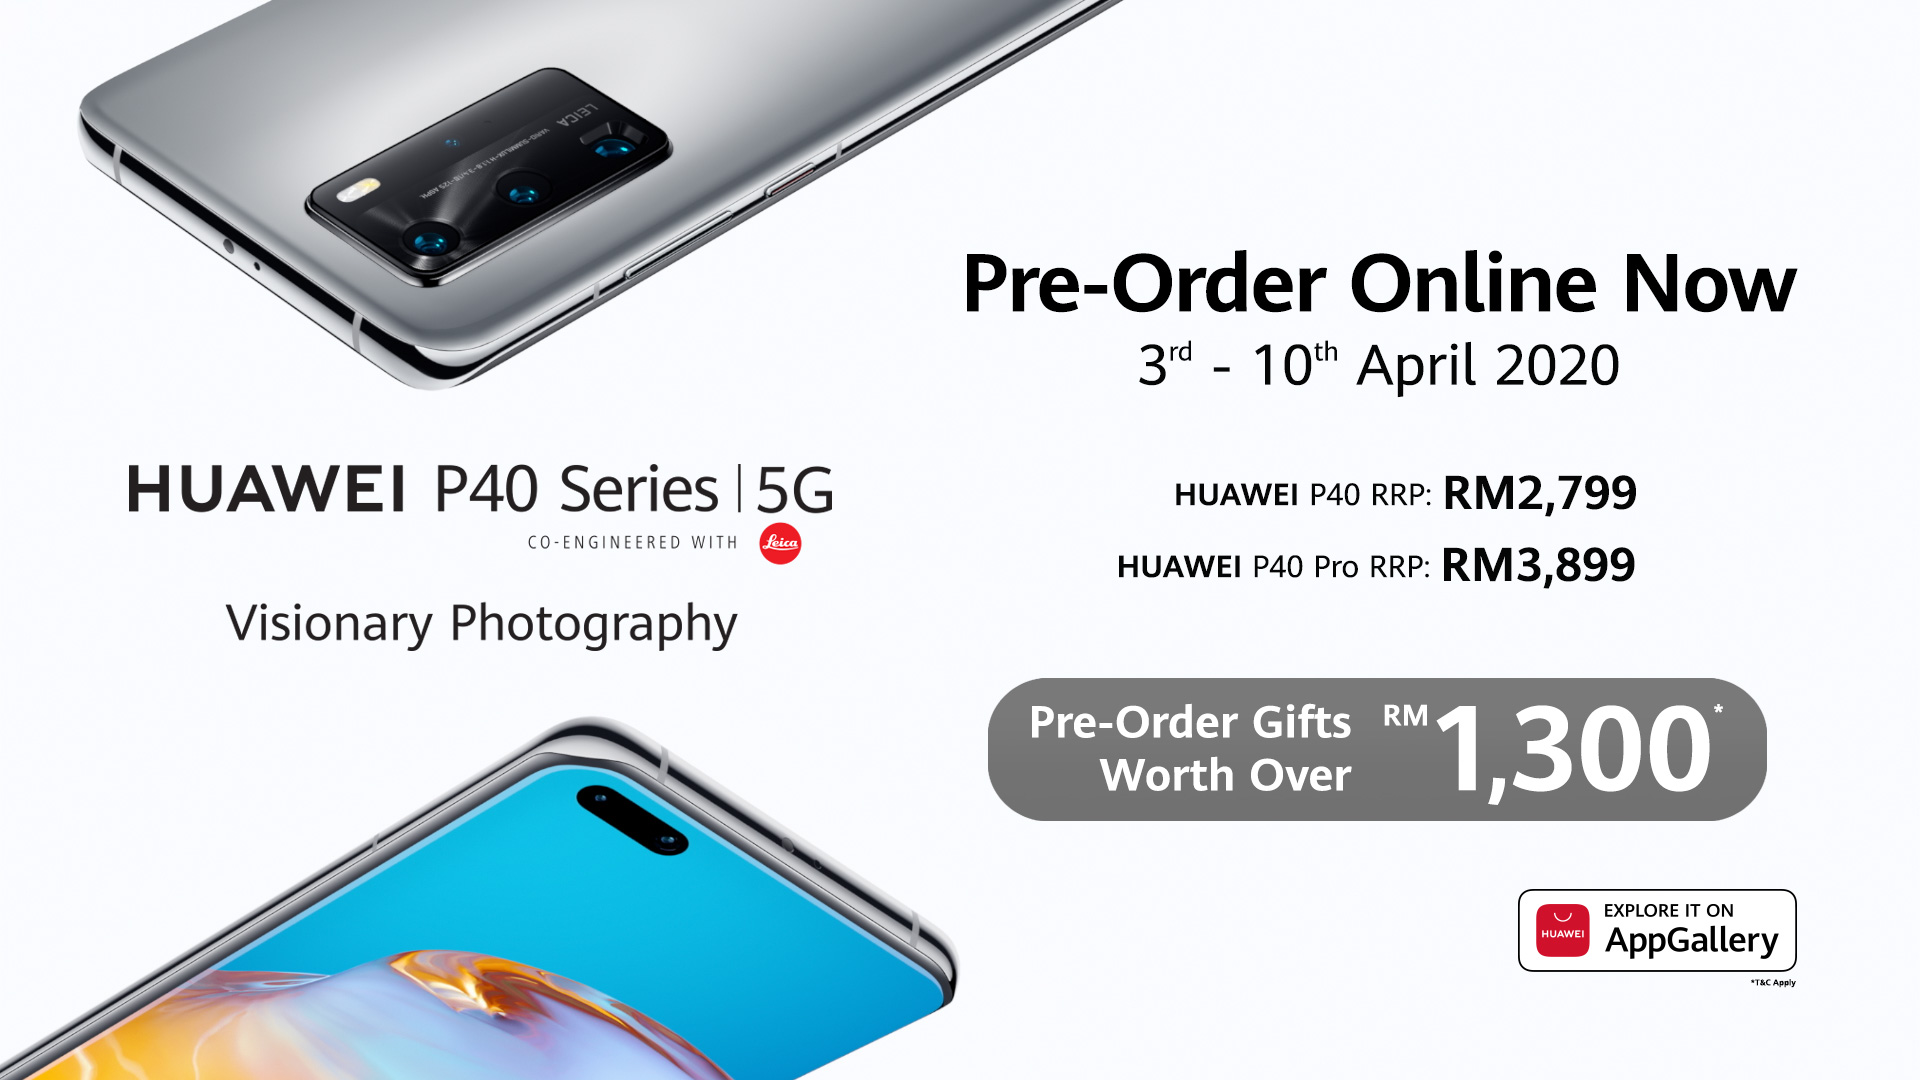 HUAWEI P40 Series and MatePad Pro Now Available for Pre-Order